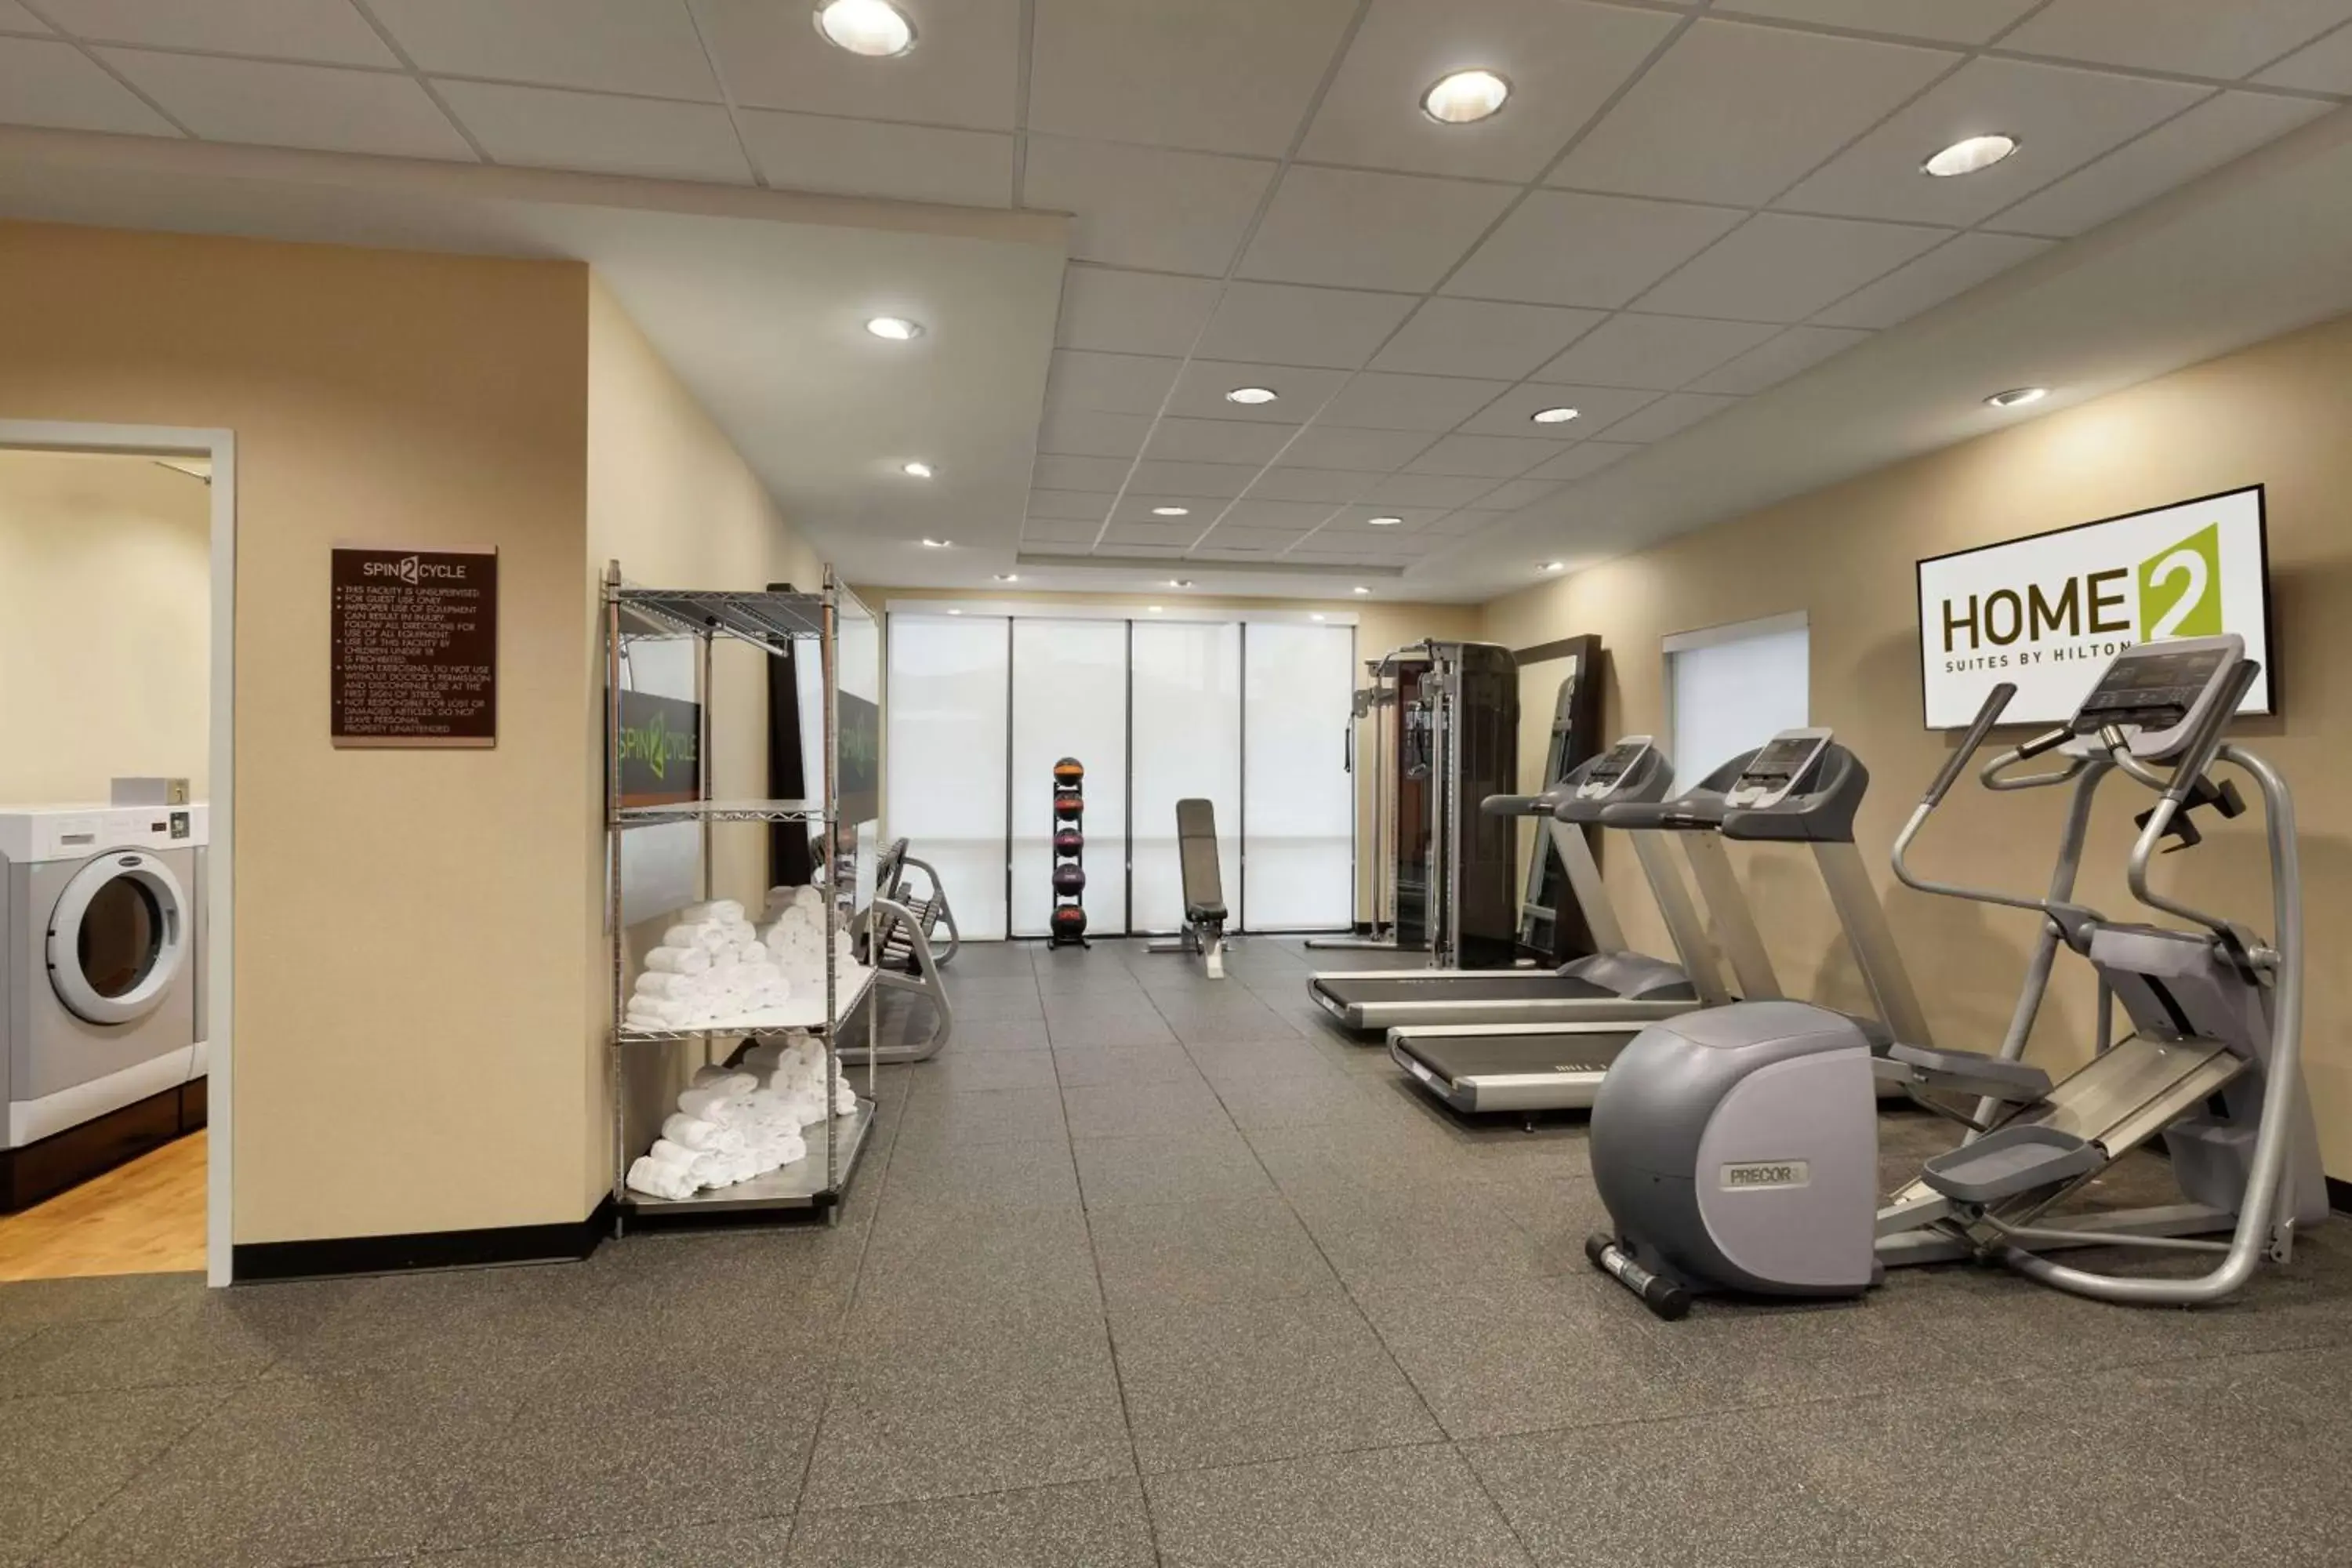 Fitness centre/facilities, Fitness Center/Facilities in Home2 Suites by Hilton Cartersville